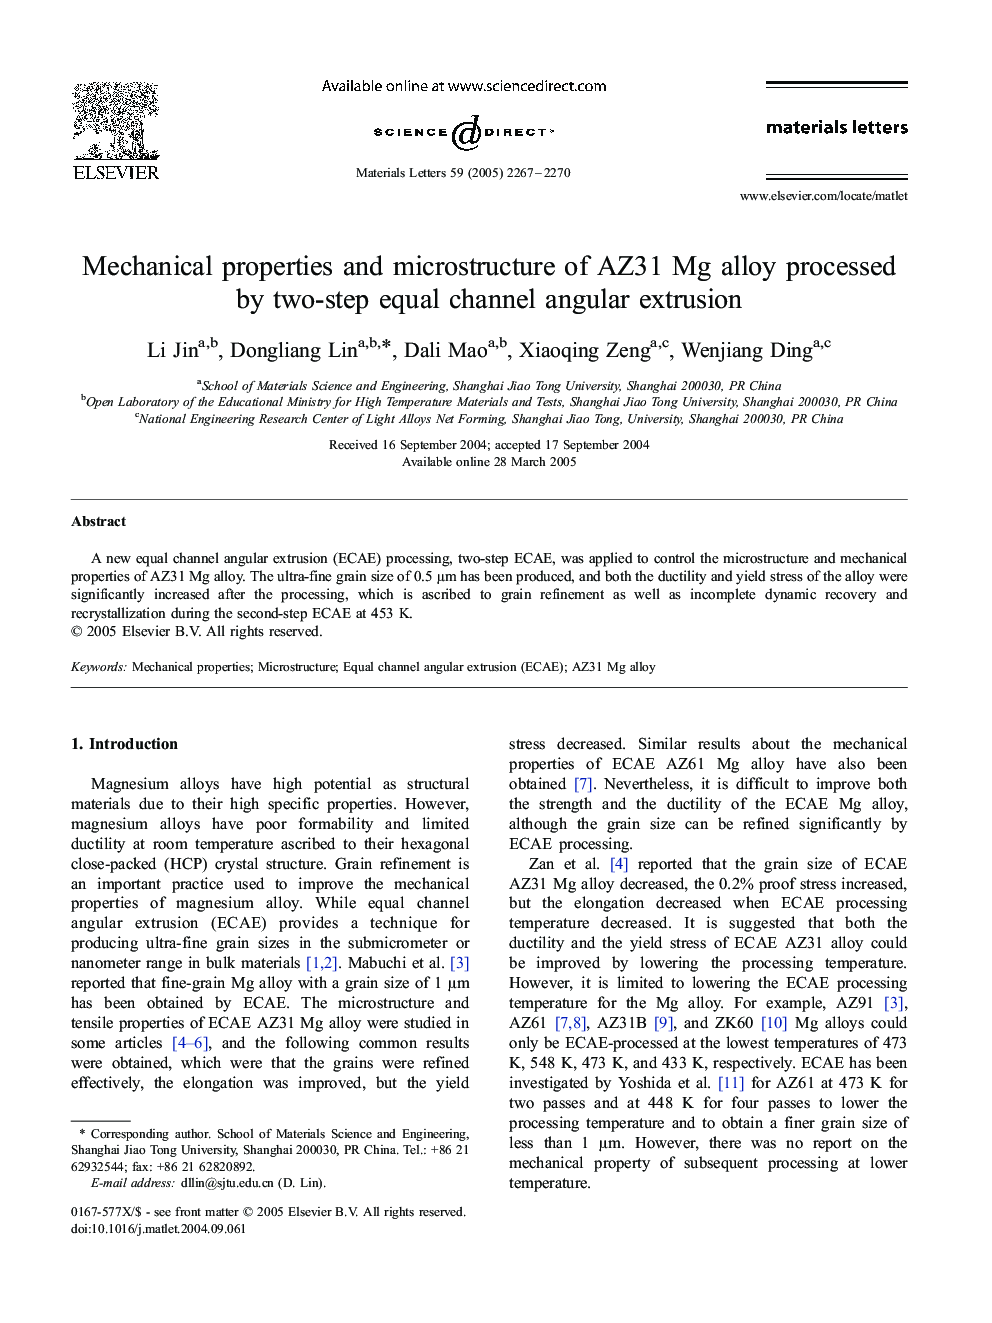 Mechanical properties and microstructure of AZ31 Mg alloy processed by two-step equal channel angular extrusion